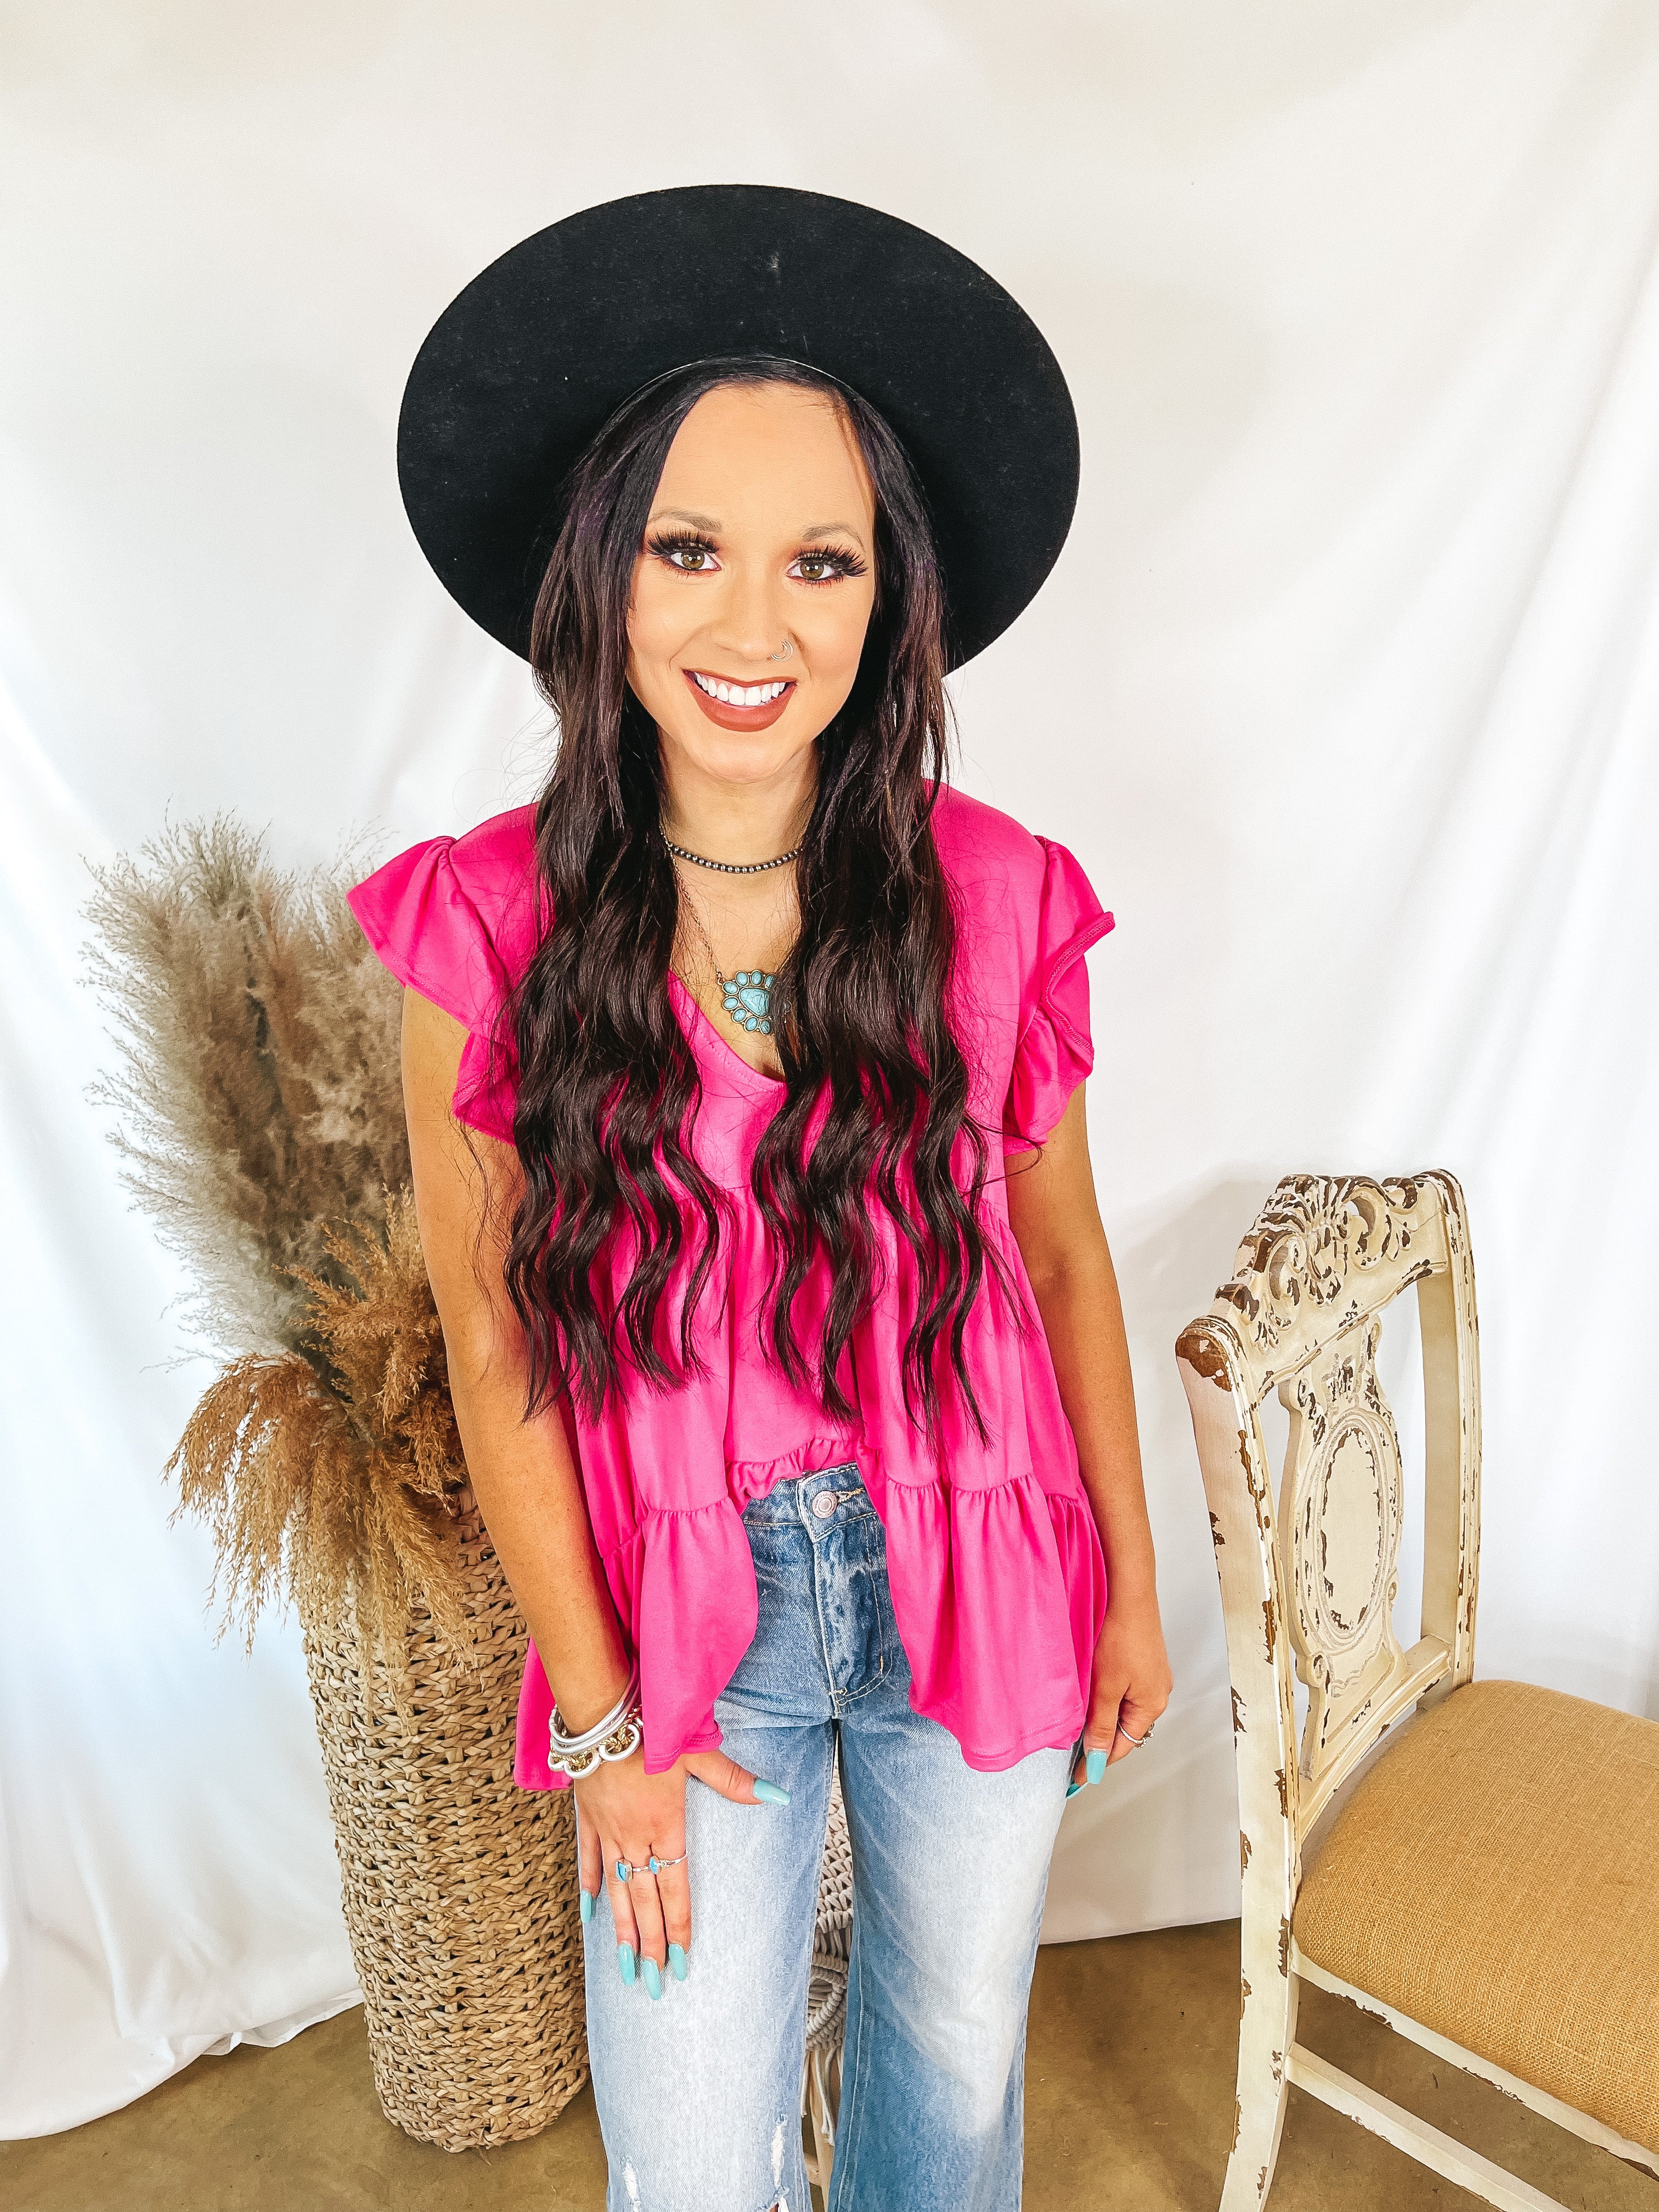 Make Your Debut Ruffle Tiered V Neck Top in Hot Pink - Giddy Up Glamour Boutique